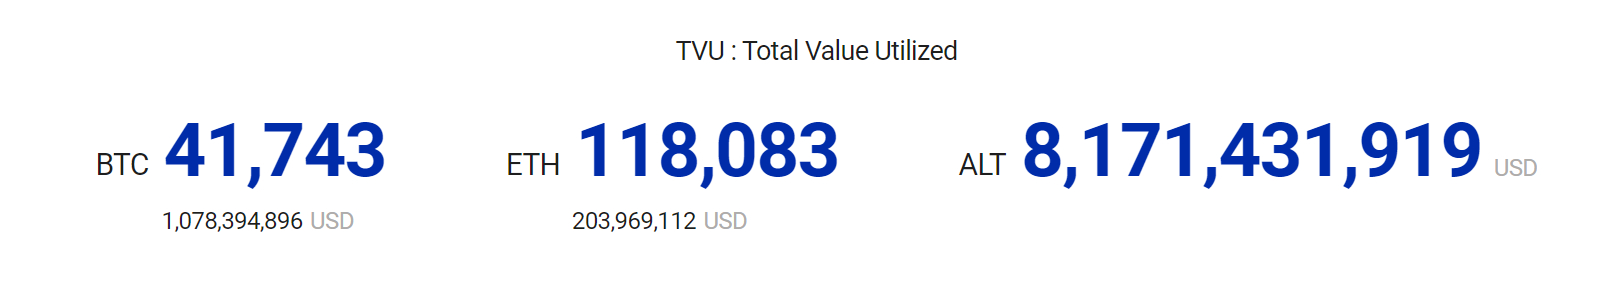 An image showing the cryptoasset total value utlized by the crypto platform Delio.